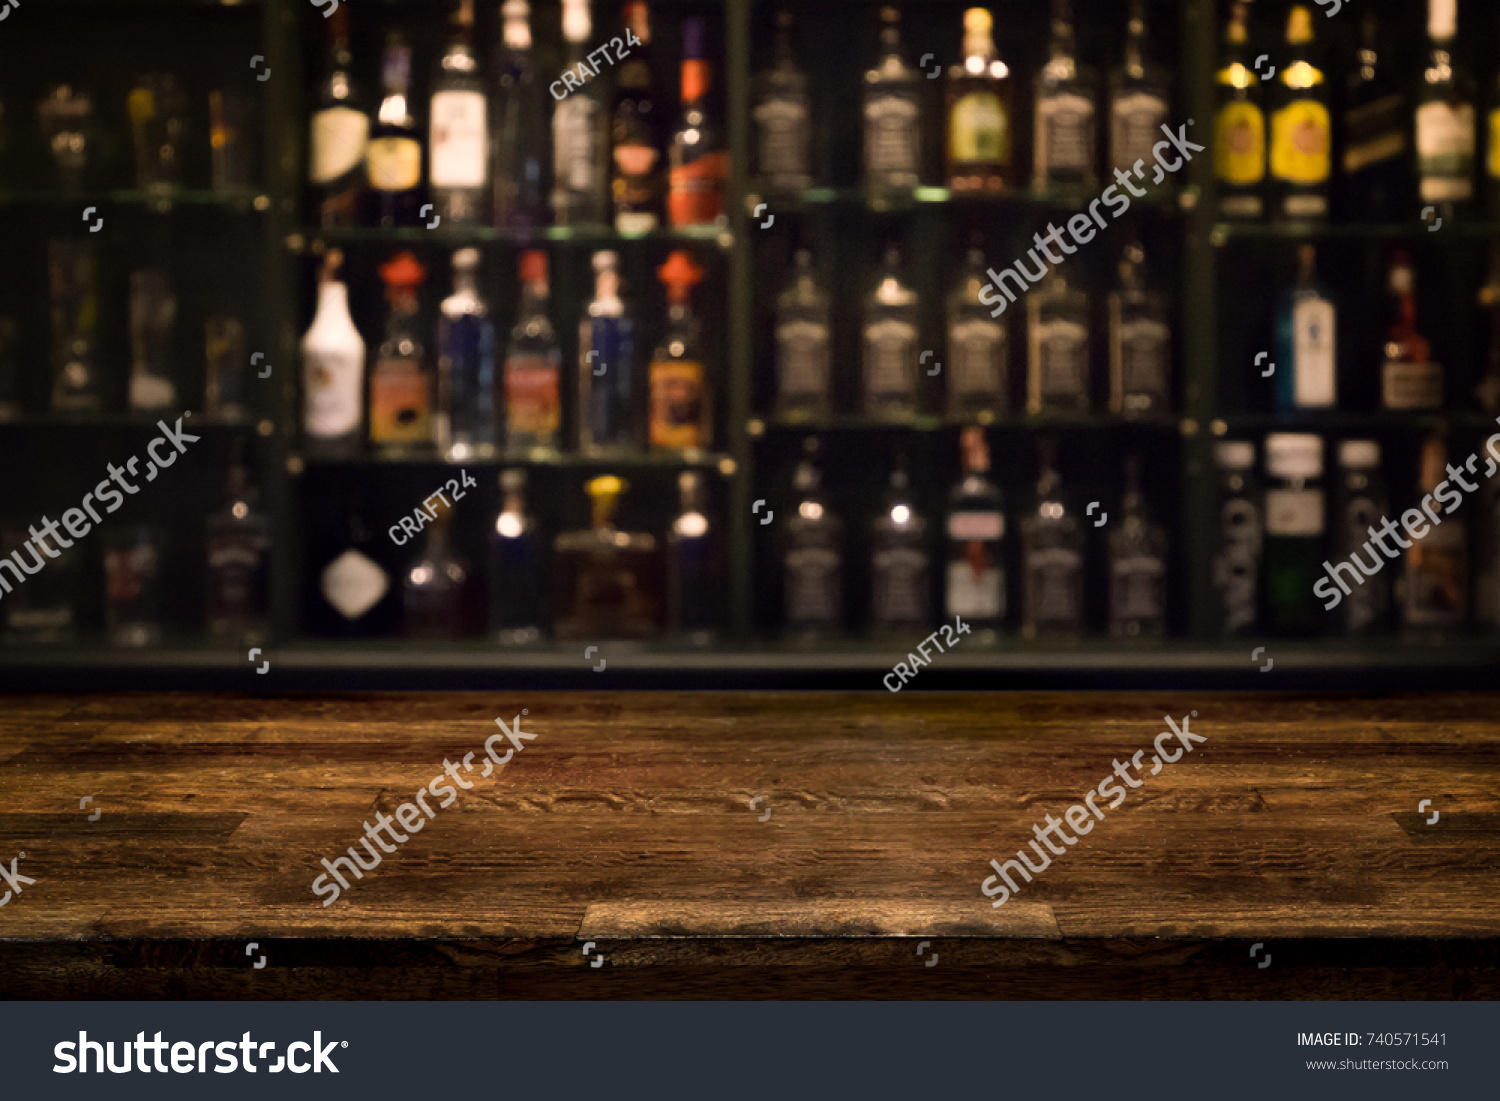 Empty wooden bar counter with defocused background and bottles of restaurant, bar or cafeteria background /for your product display #740571541